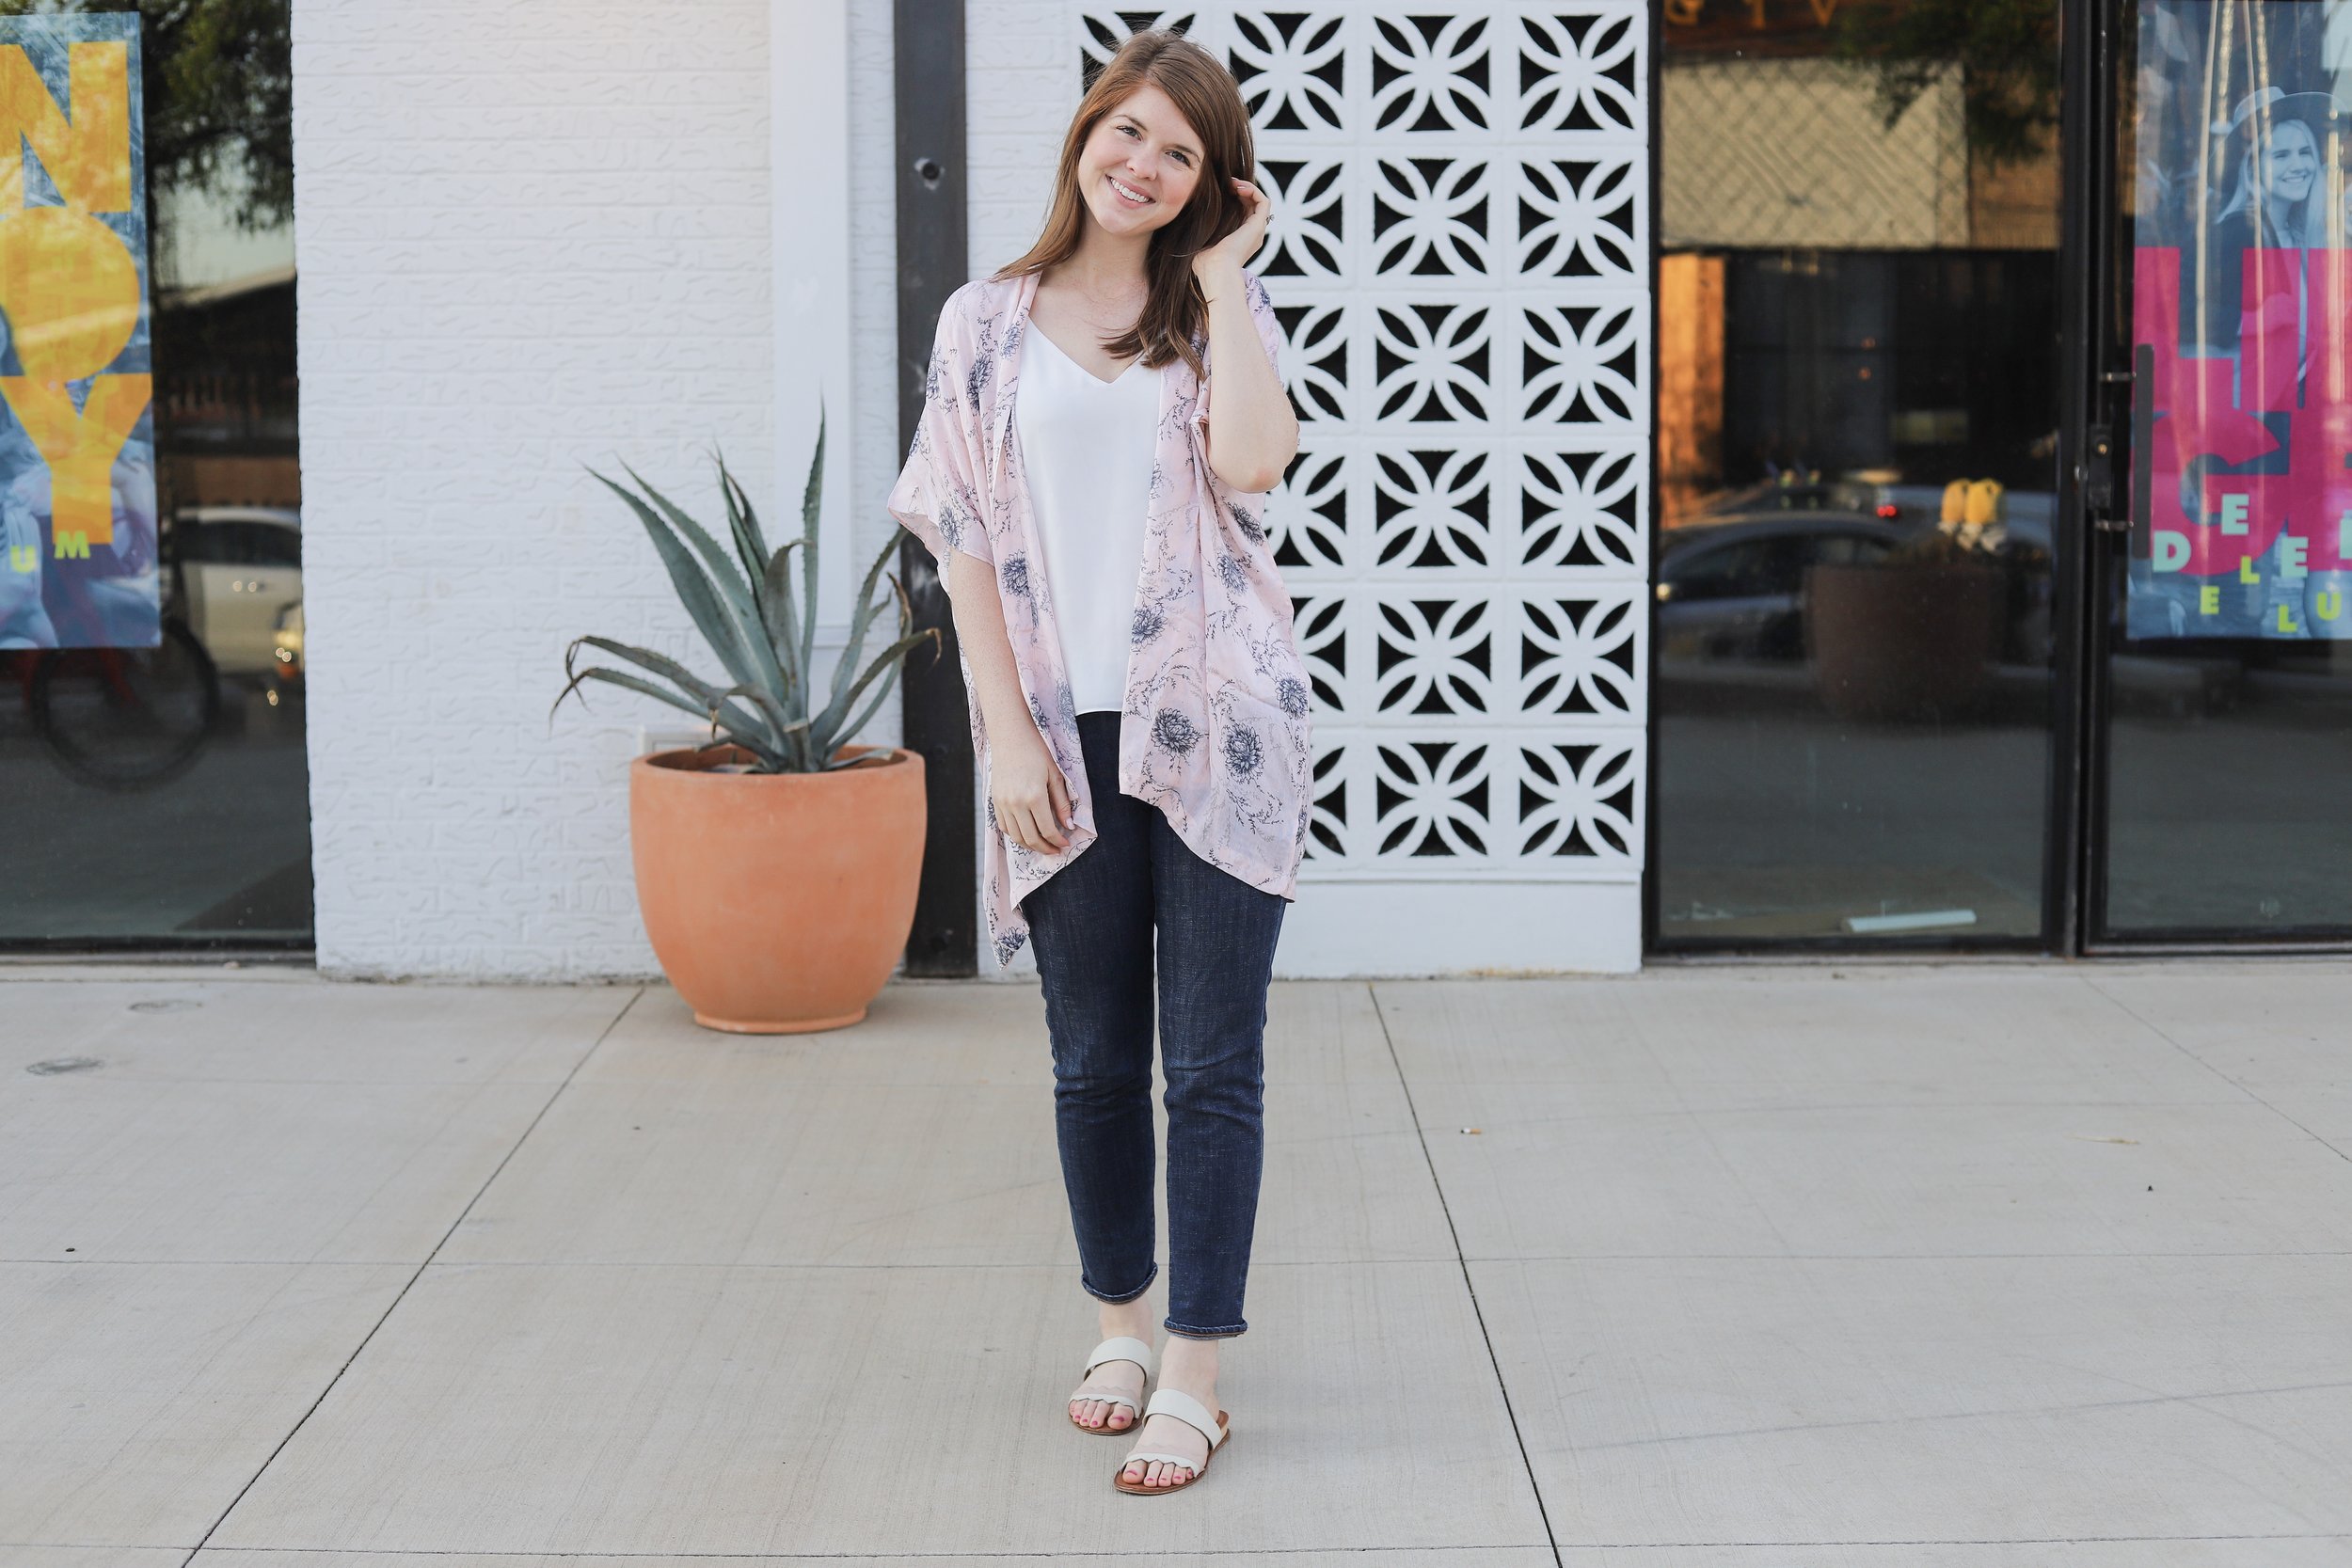 how to brighten white clothing without bleach, spring and summer whites, branch basics, lments of style, ellemulenos, nontoxic laundry detergent, loft pink vine kimono